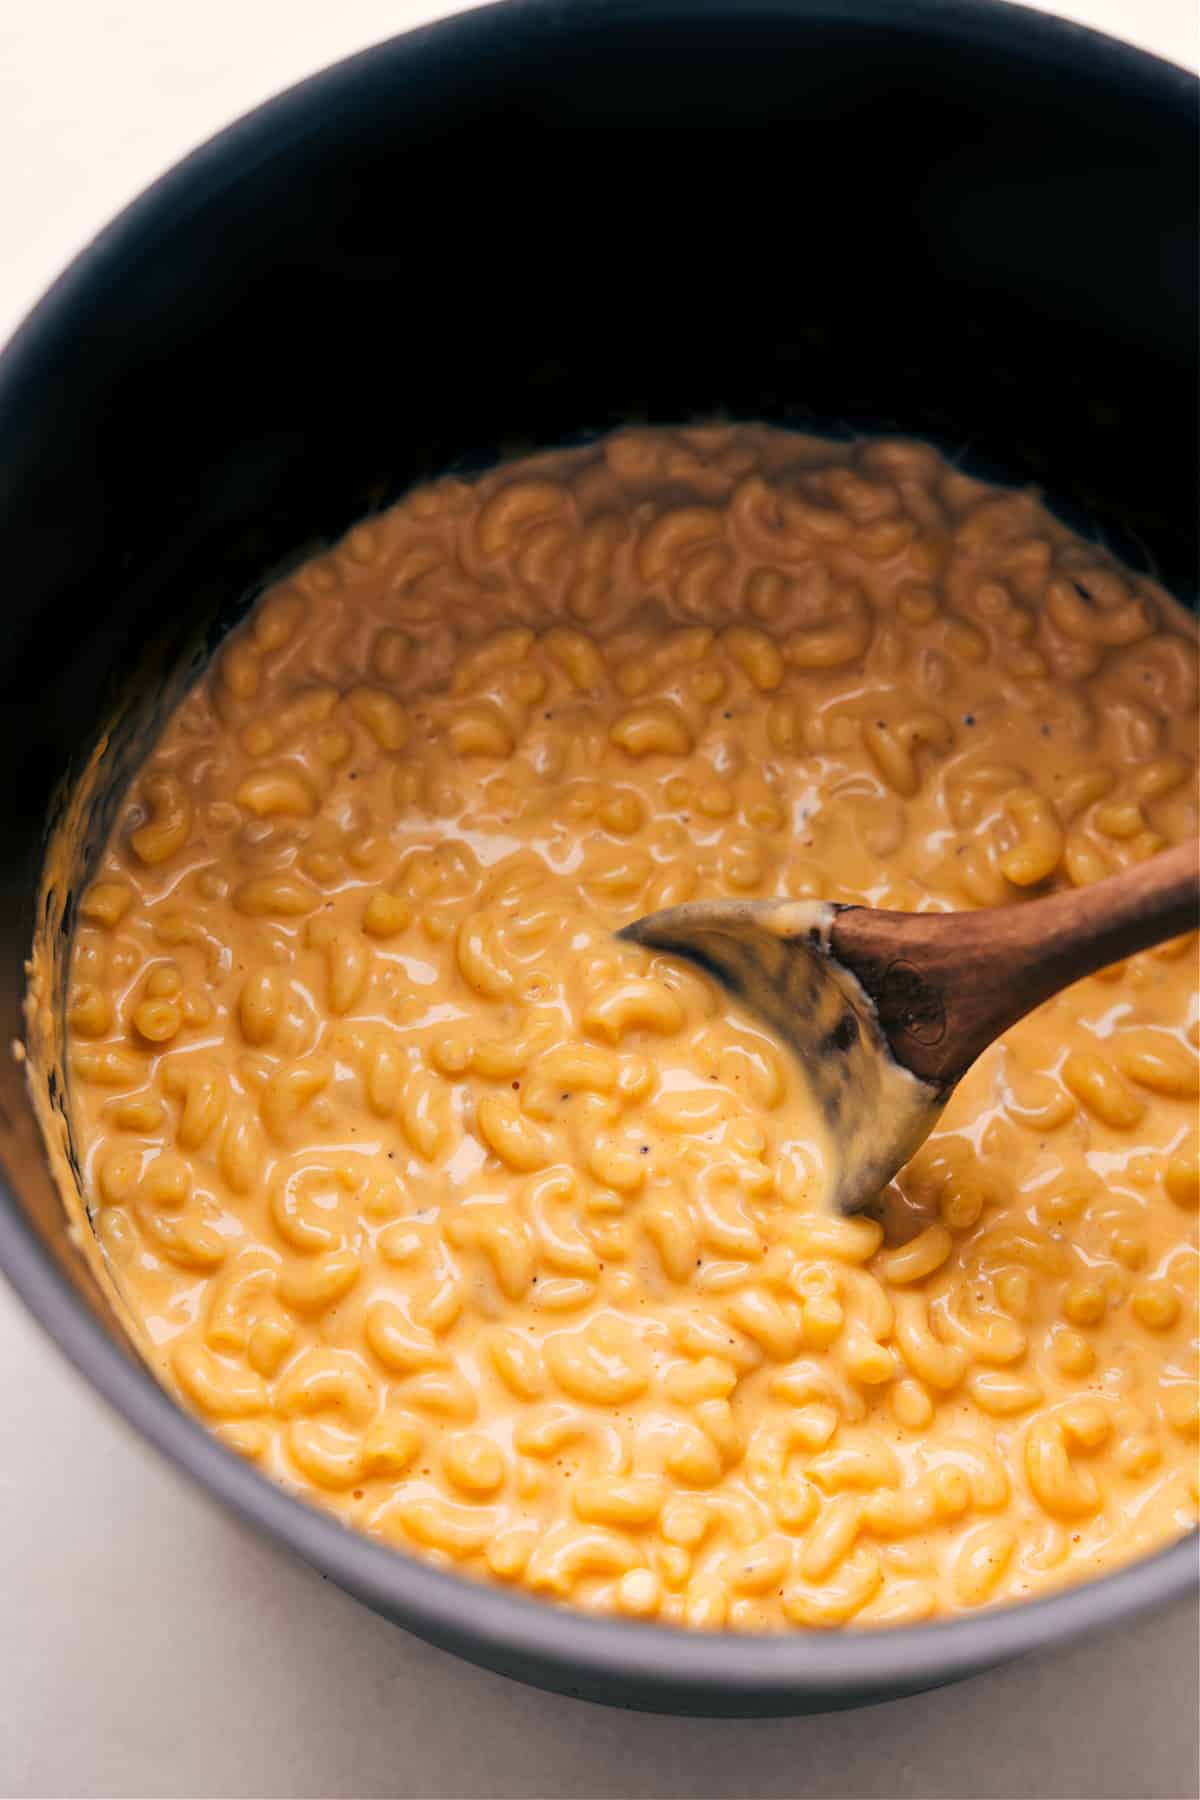 The easy mac and cheese in the pot.